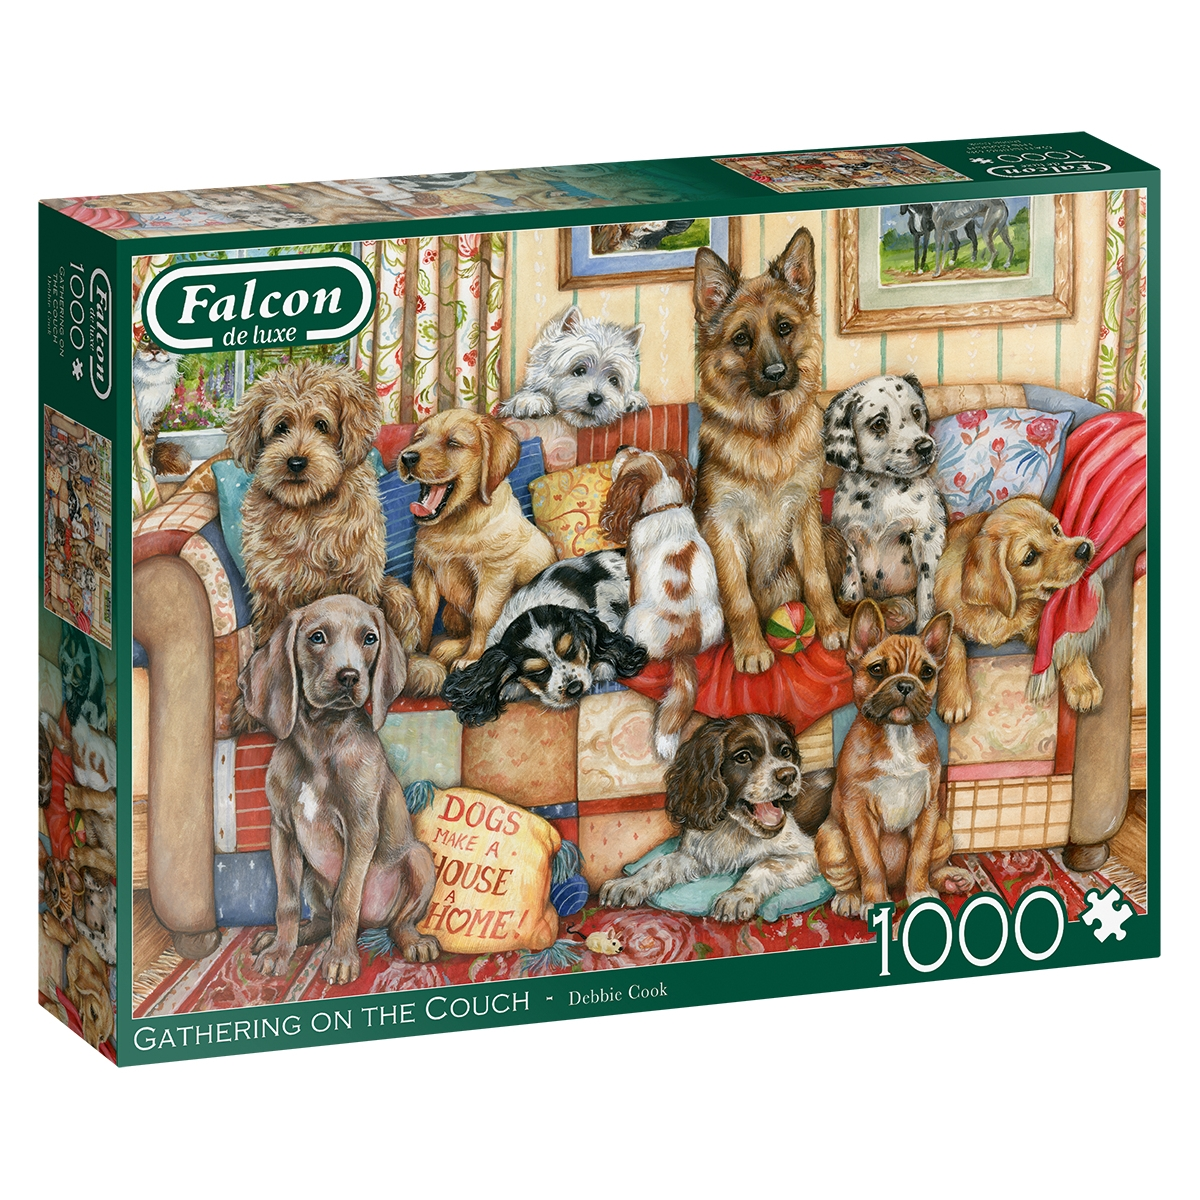 FALCON Jumbo 11293 Gathering Dog Zubehör, Couch-1000 Mehrfarben on The Teile Puzzle